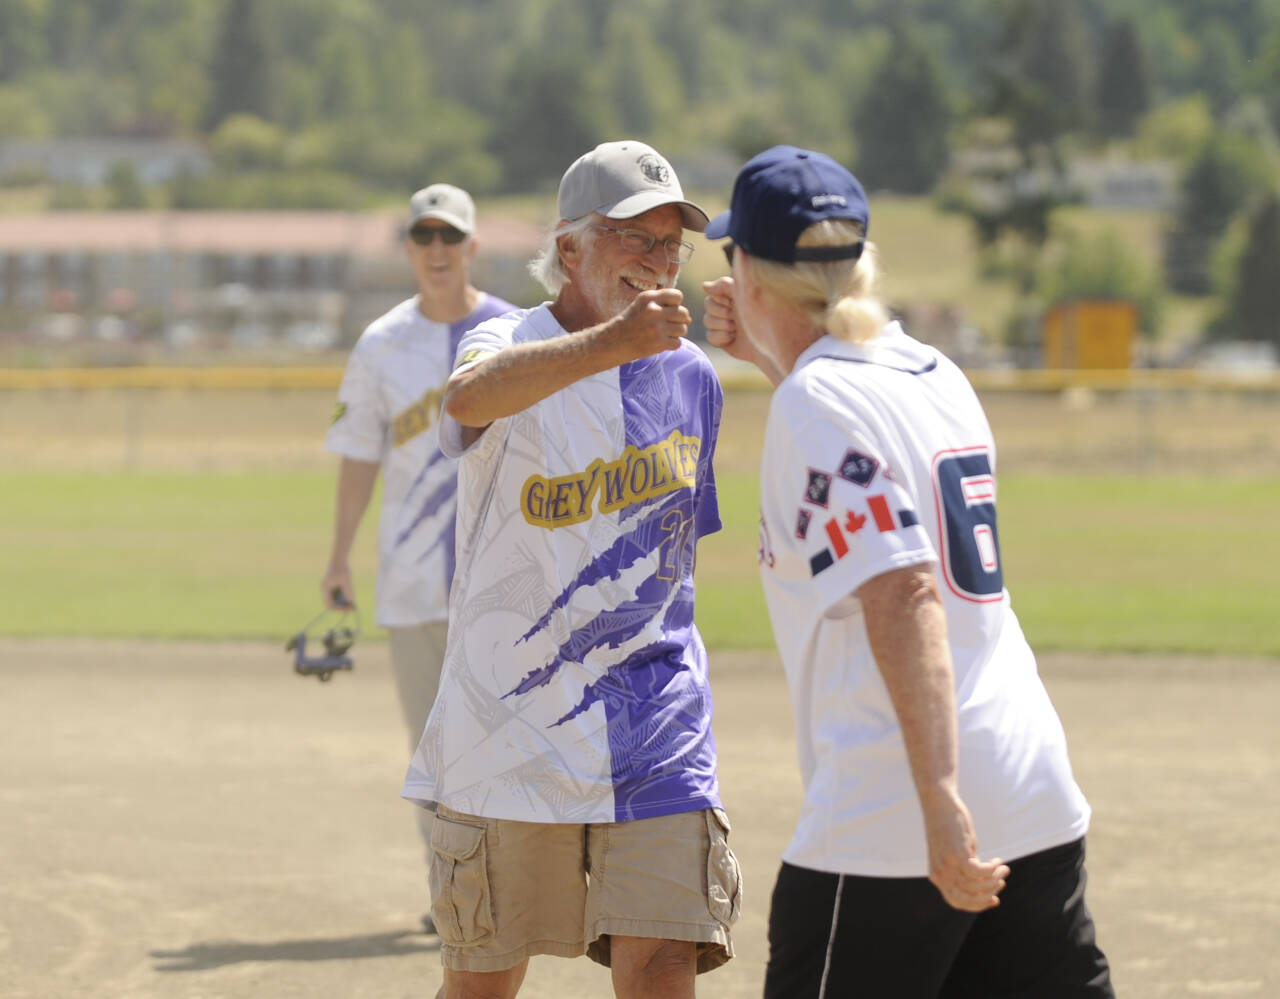 Sequim Greywolves’ Joel Hecht, center, bumps fists with a Victoria Raiders player after their clubs’ first friendly softball match-up on July 8 at Carrie Blake Community Park. Behind Hecht is teammate David Pugsley.